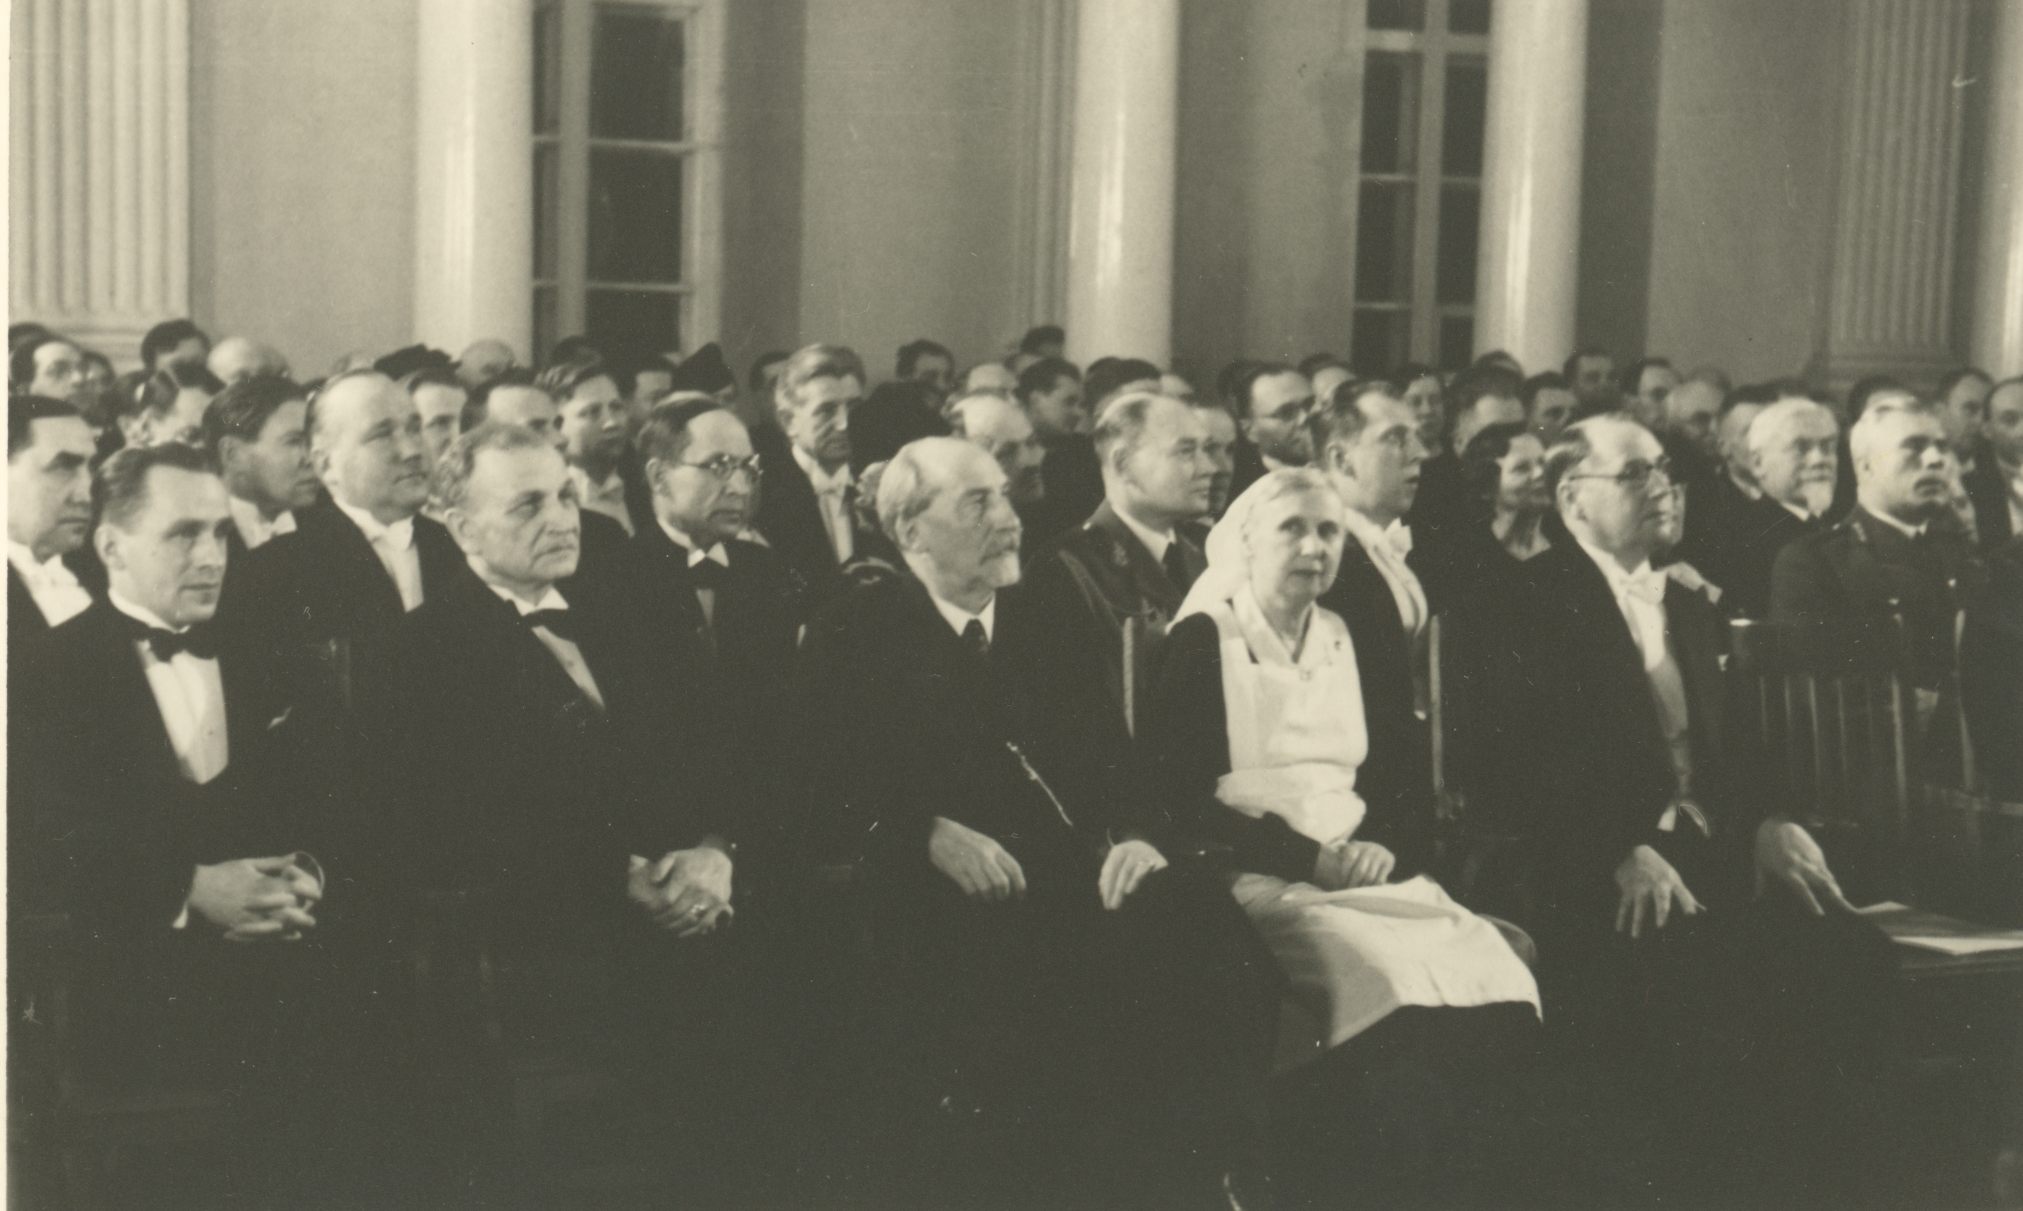 Be at the celebrations at the university. J. Kõpp - from left 2.